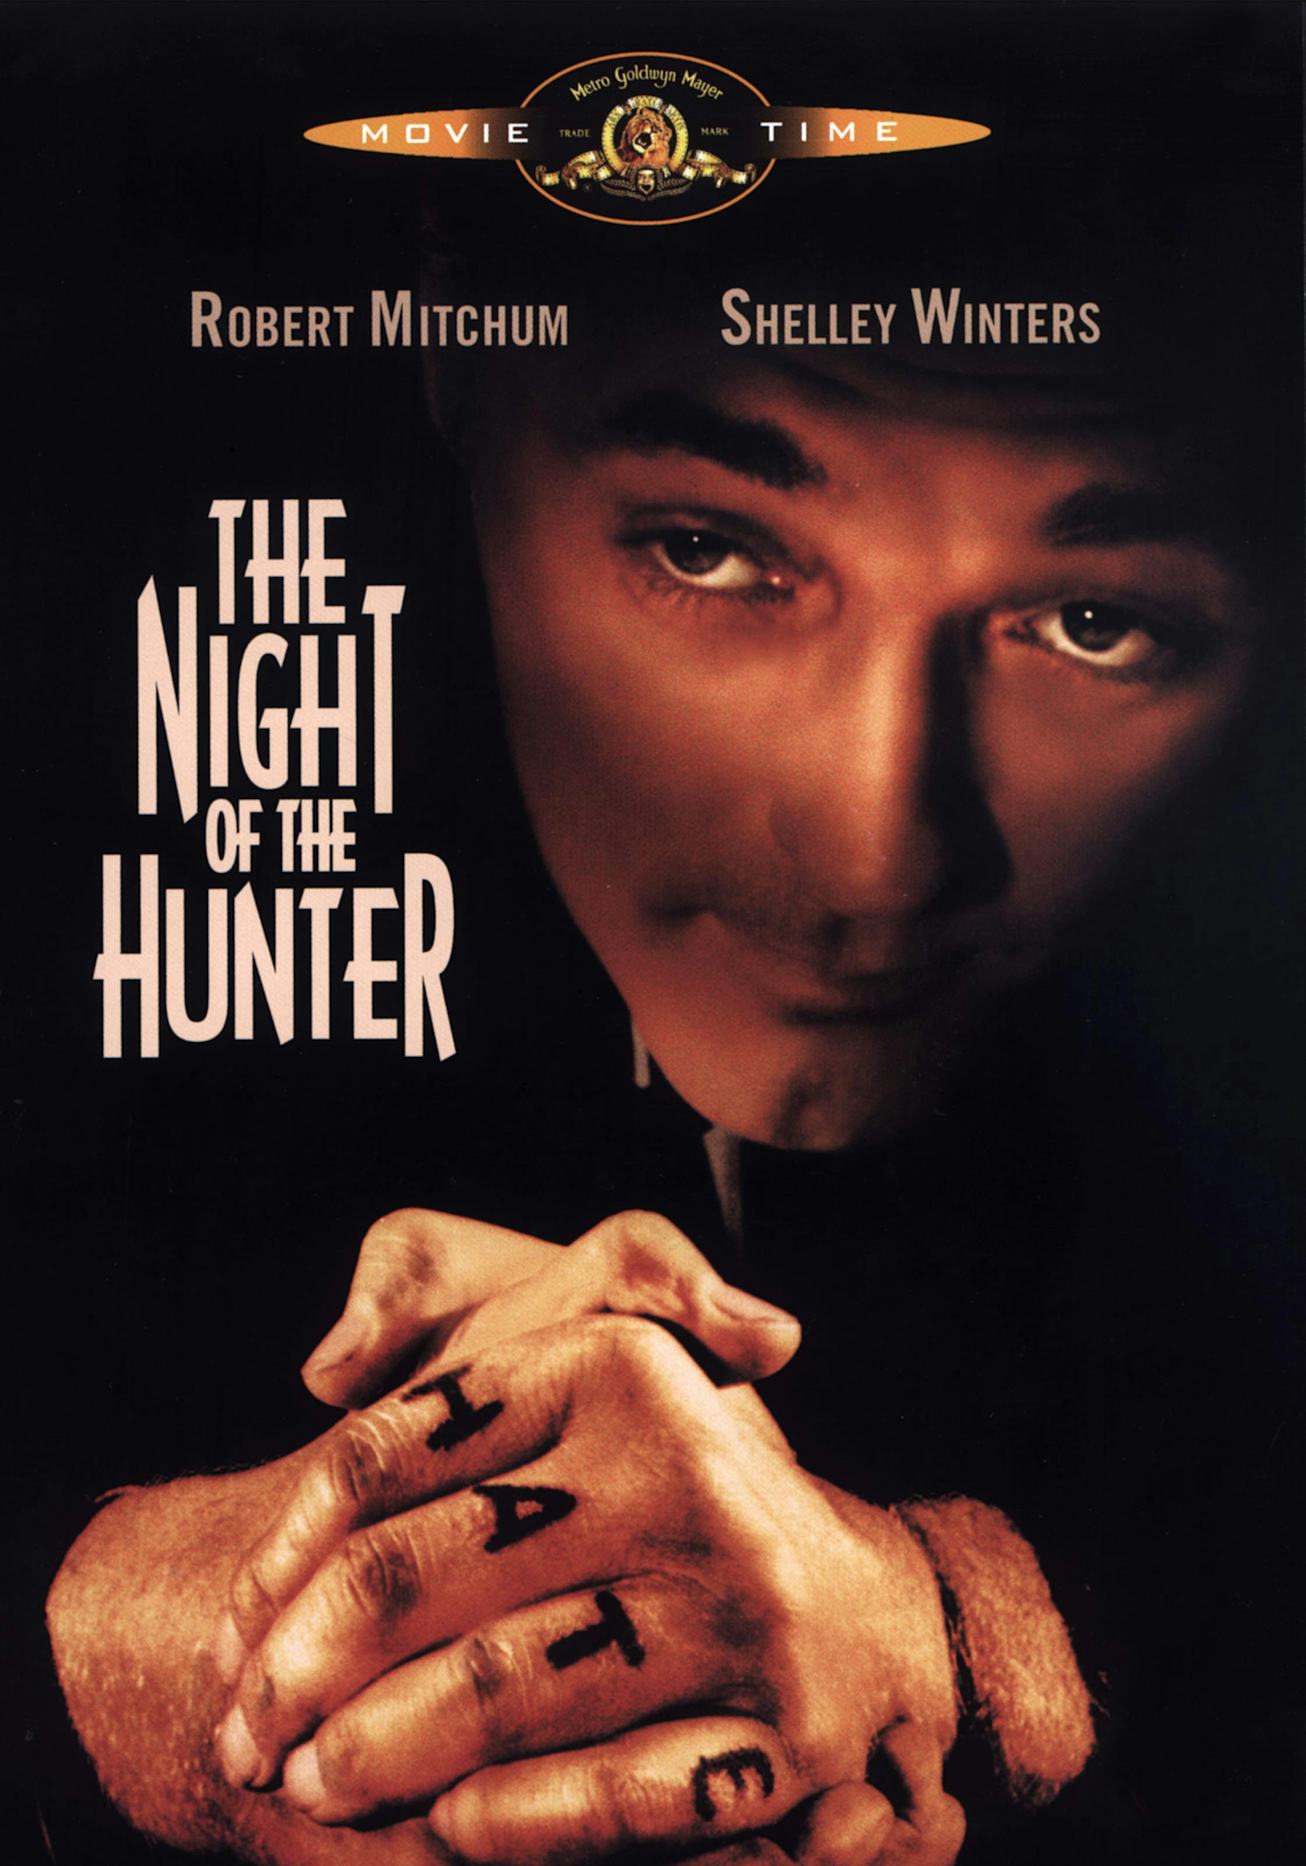 Cover for the movie The Night of the Hunter 1955, inspired by Southern gothic thriller